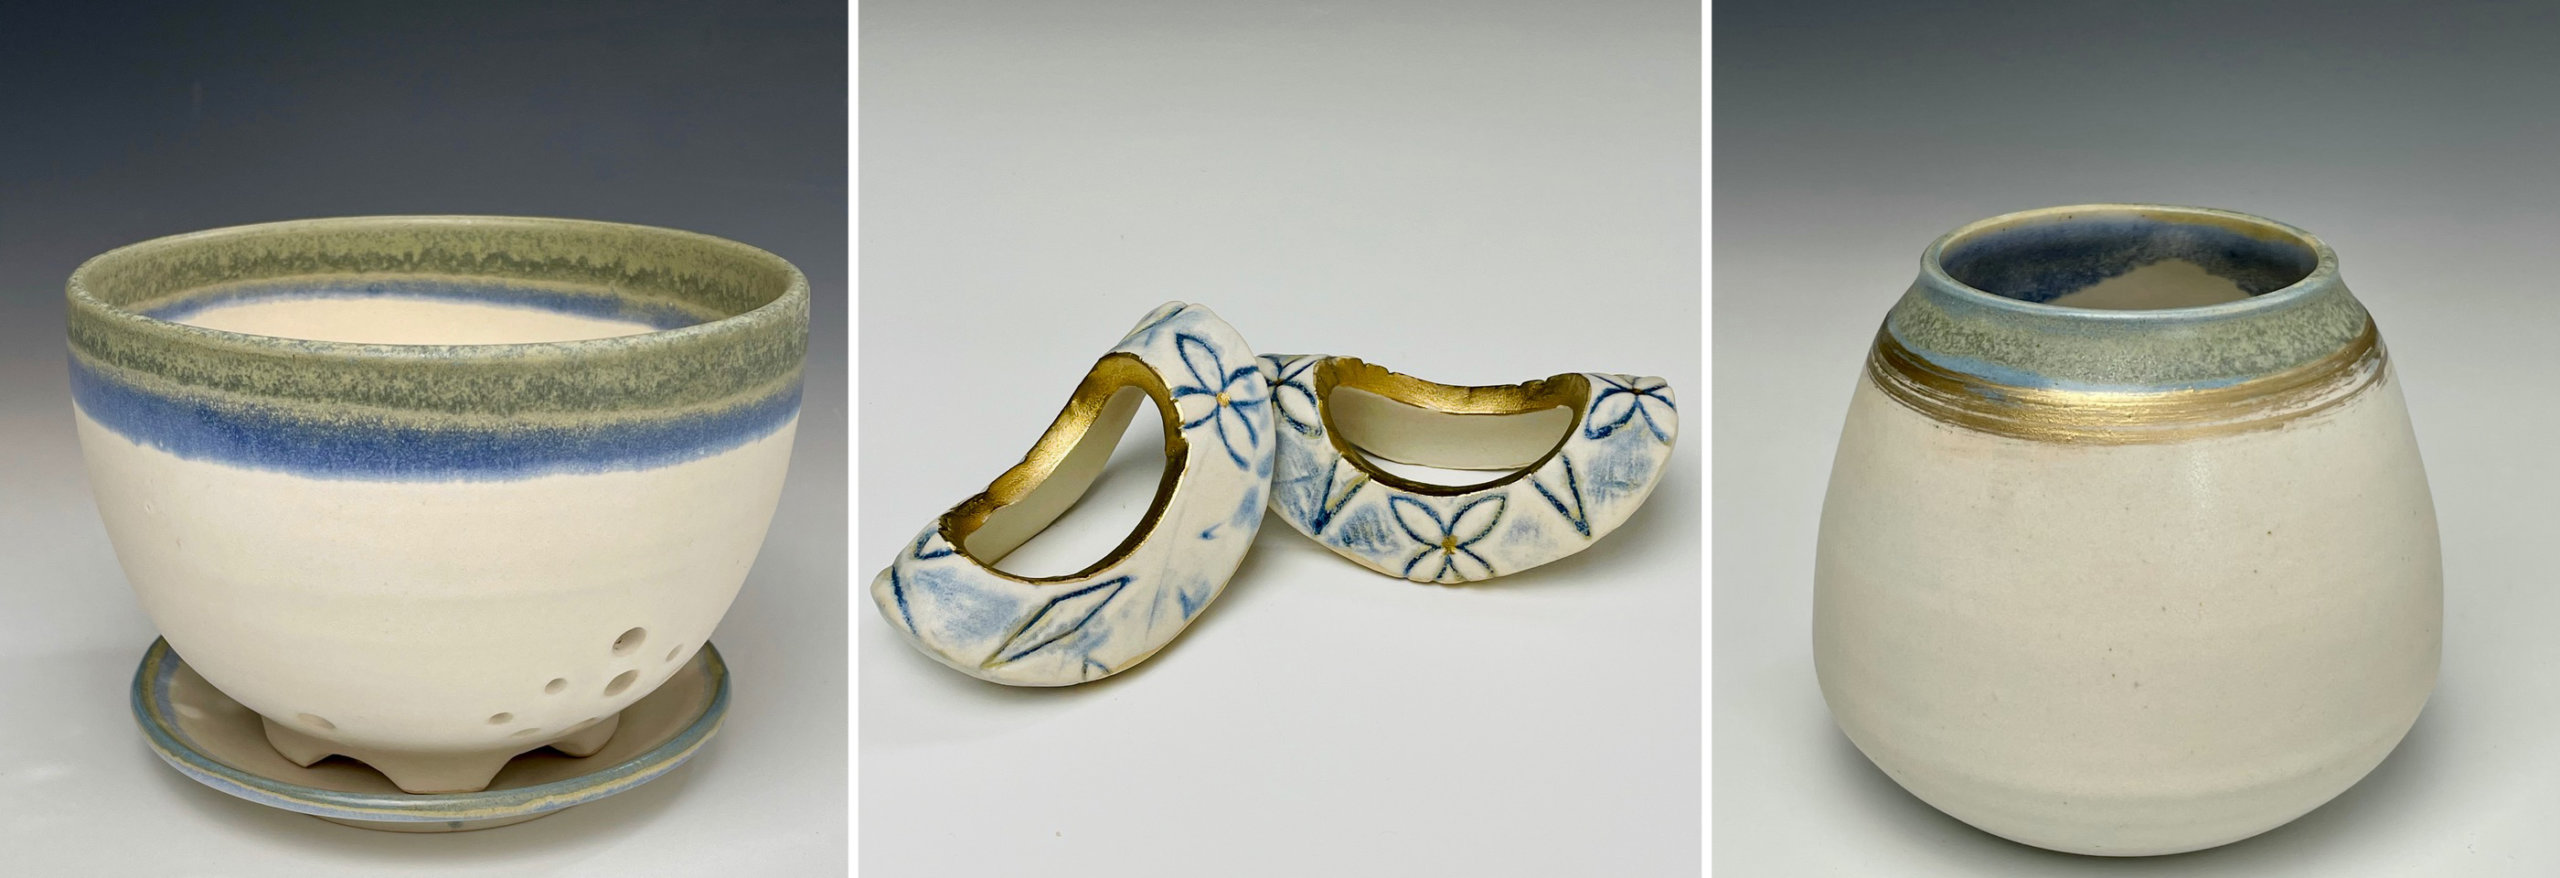 Eve Behar's ceramics available at Fishers Home Furnishings